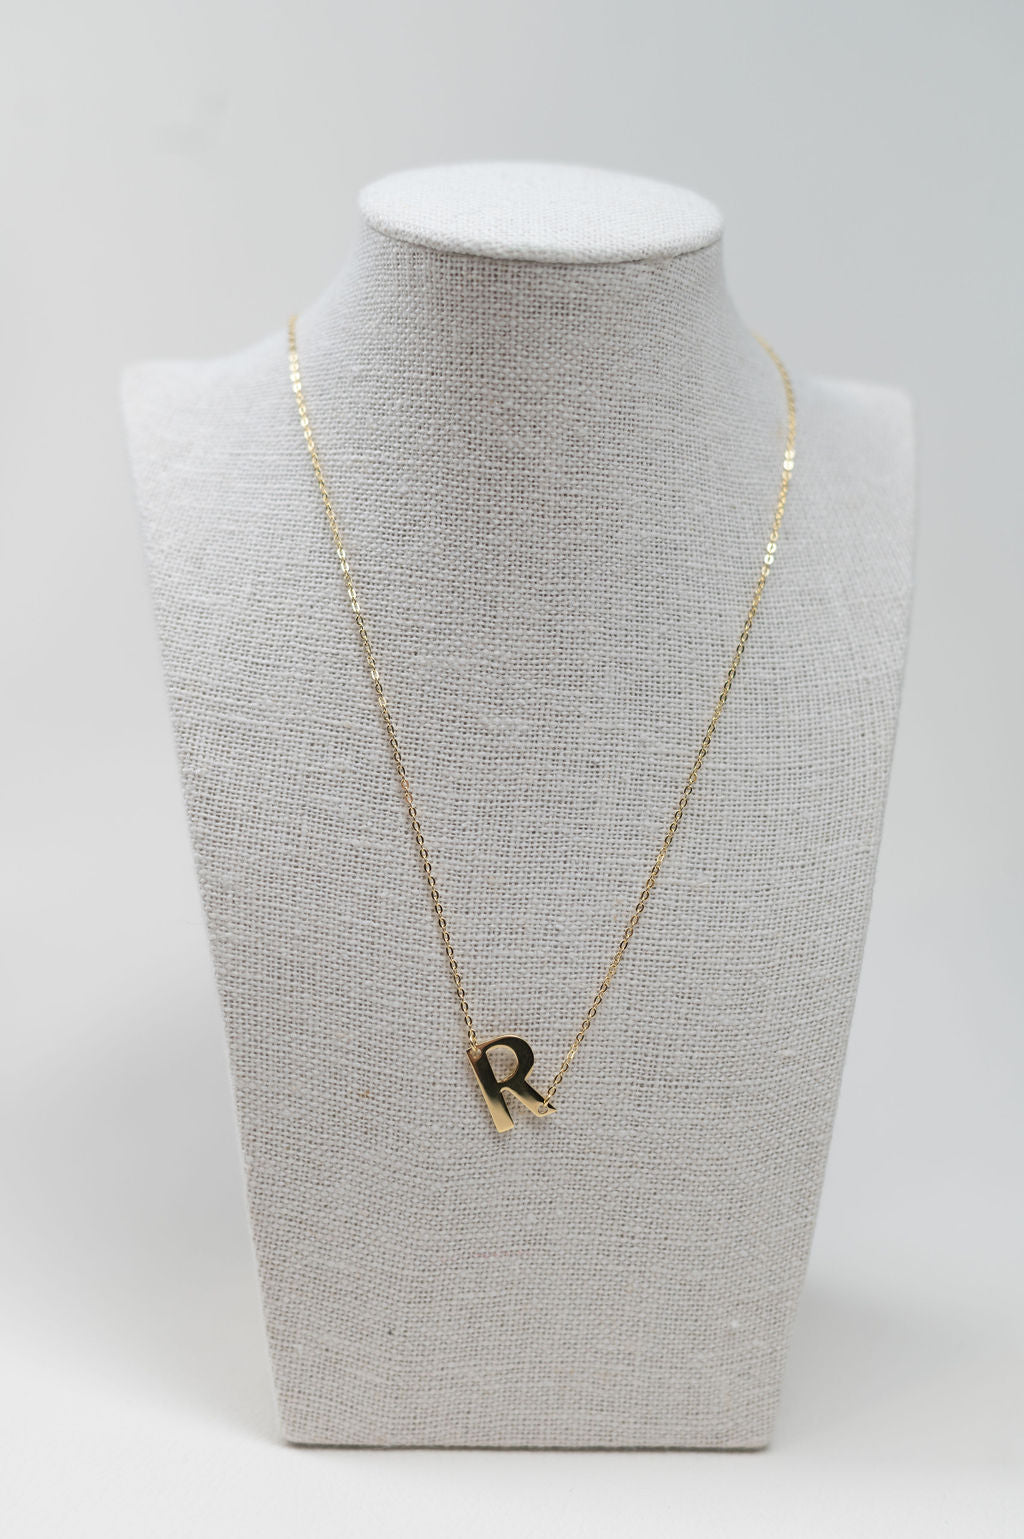 The Company 'Initial Me' Pendant - R